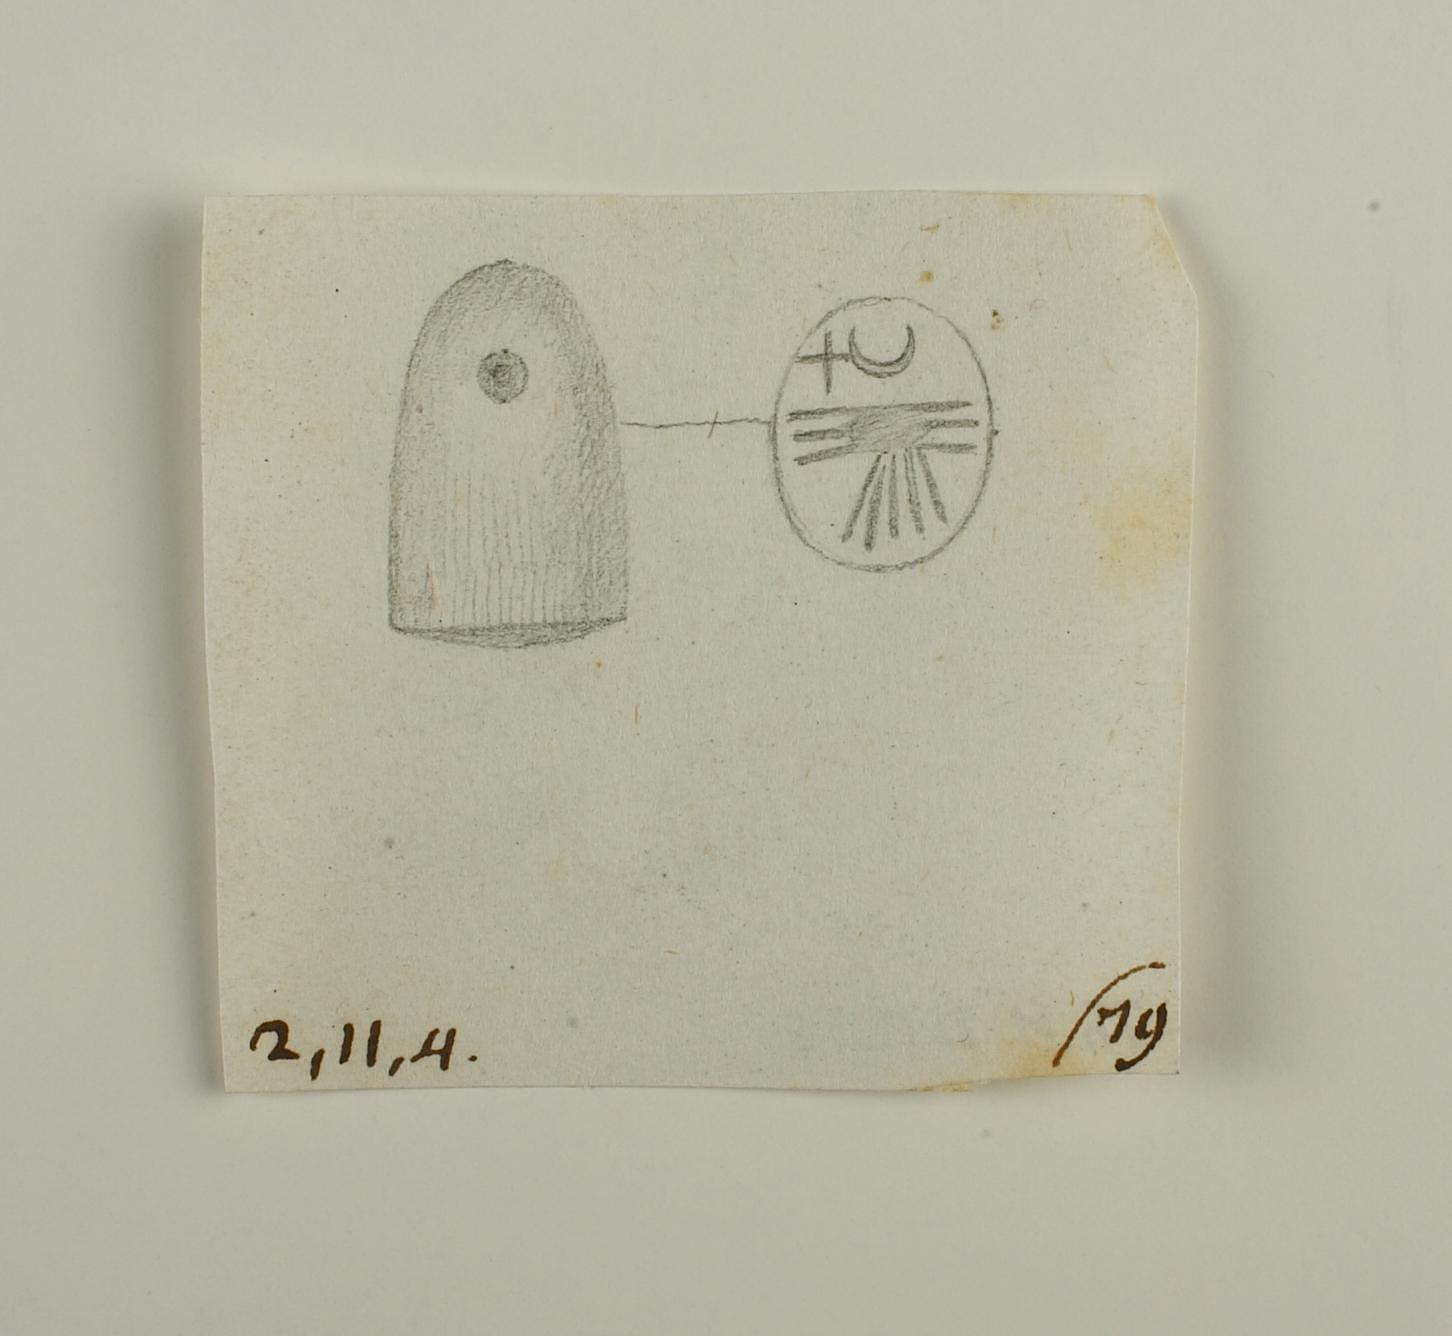 Seal stone, conic, D1296